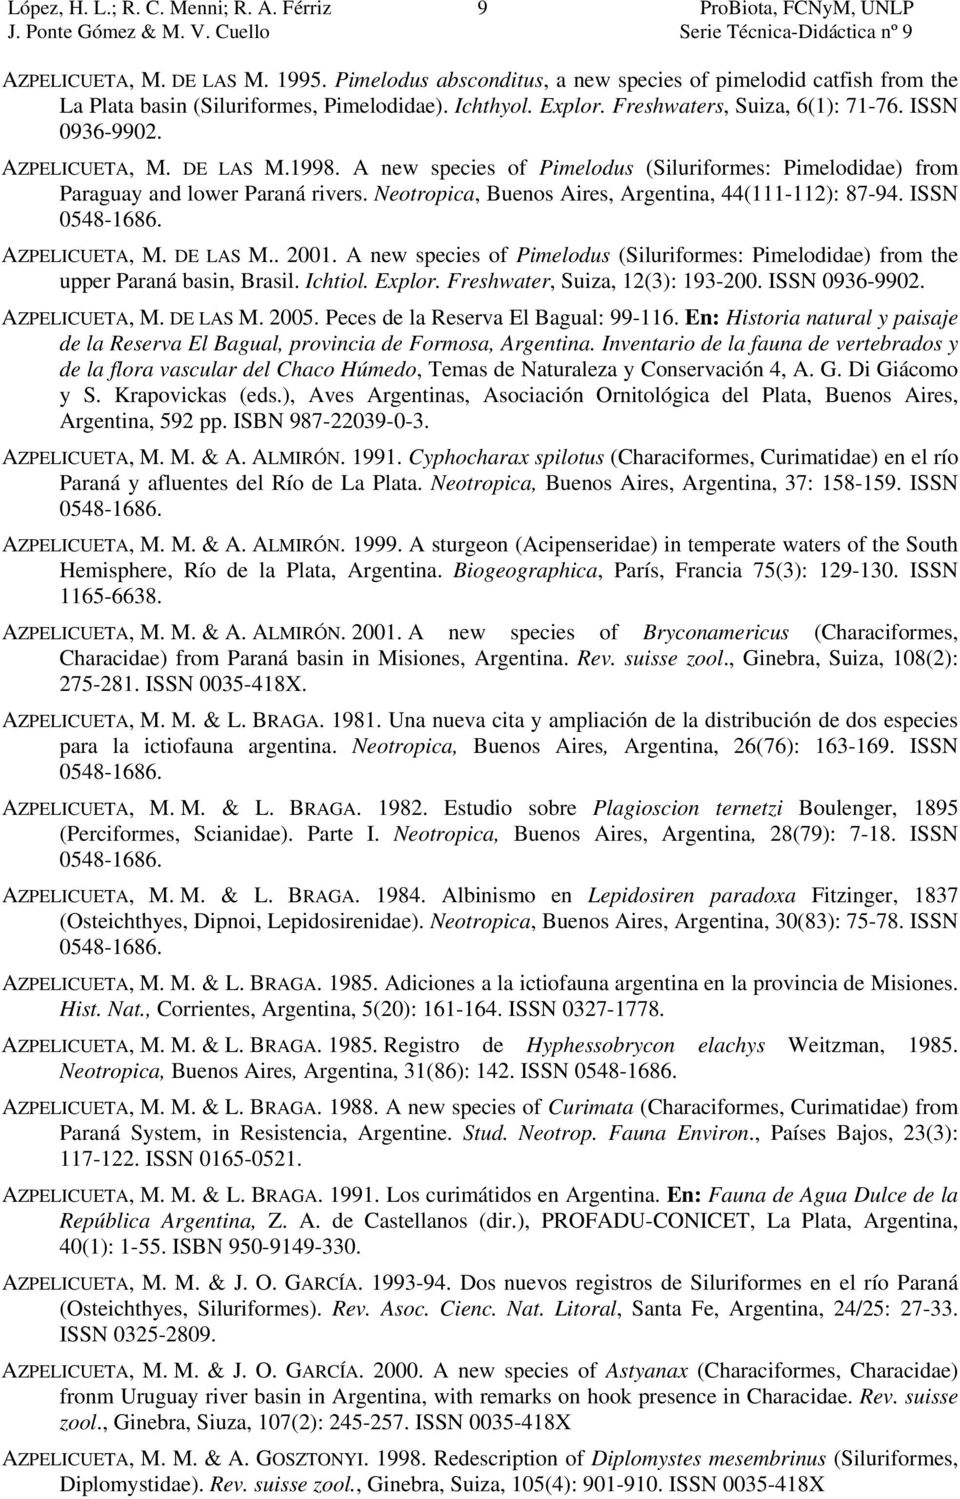 ISSN 0548-1686. AZPELICUETA, M. DE LAS M.. 2001. A new species of Pimelodus (Siluriformes: Pimelodidae) from the upper Paraná basin, Brasil. Ichtiol. Explor. Freshwater, Suiza, 12(3): 193-200.